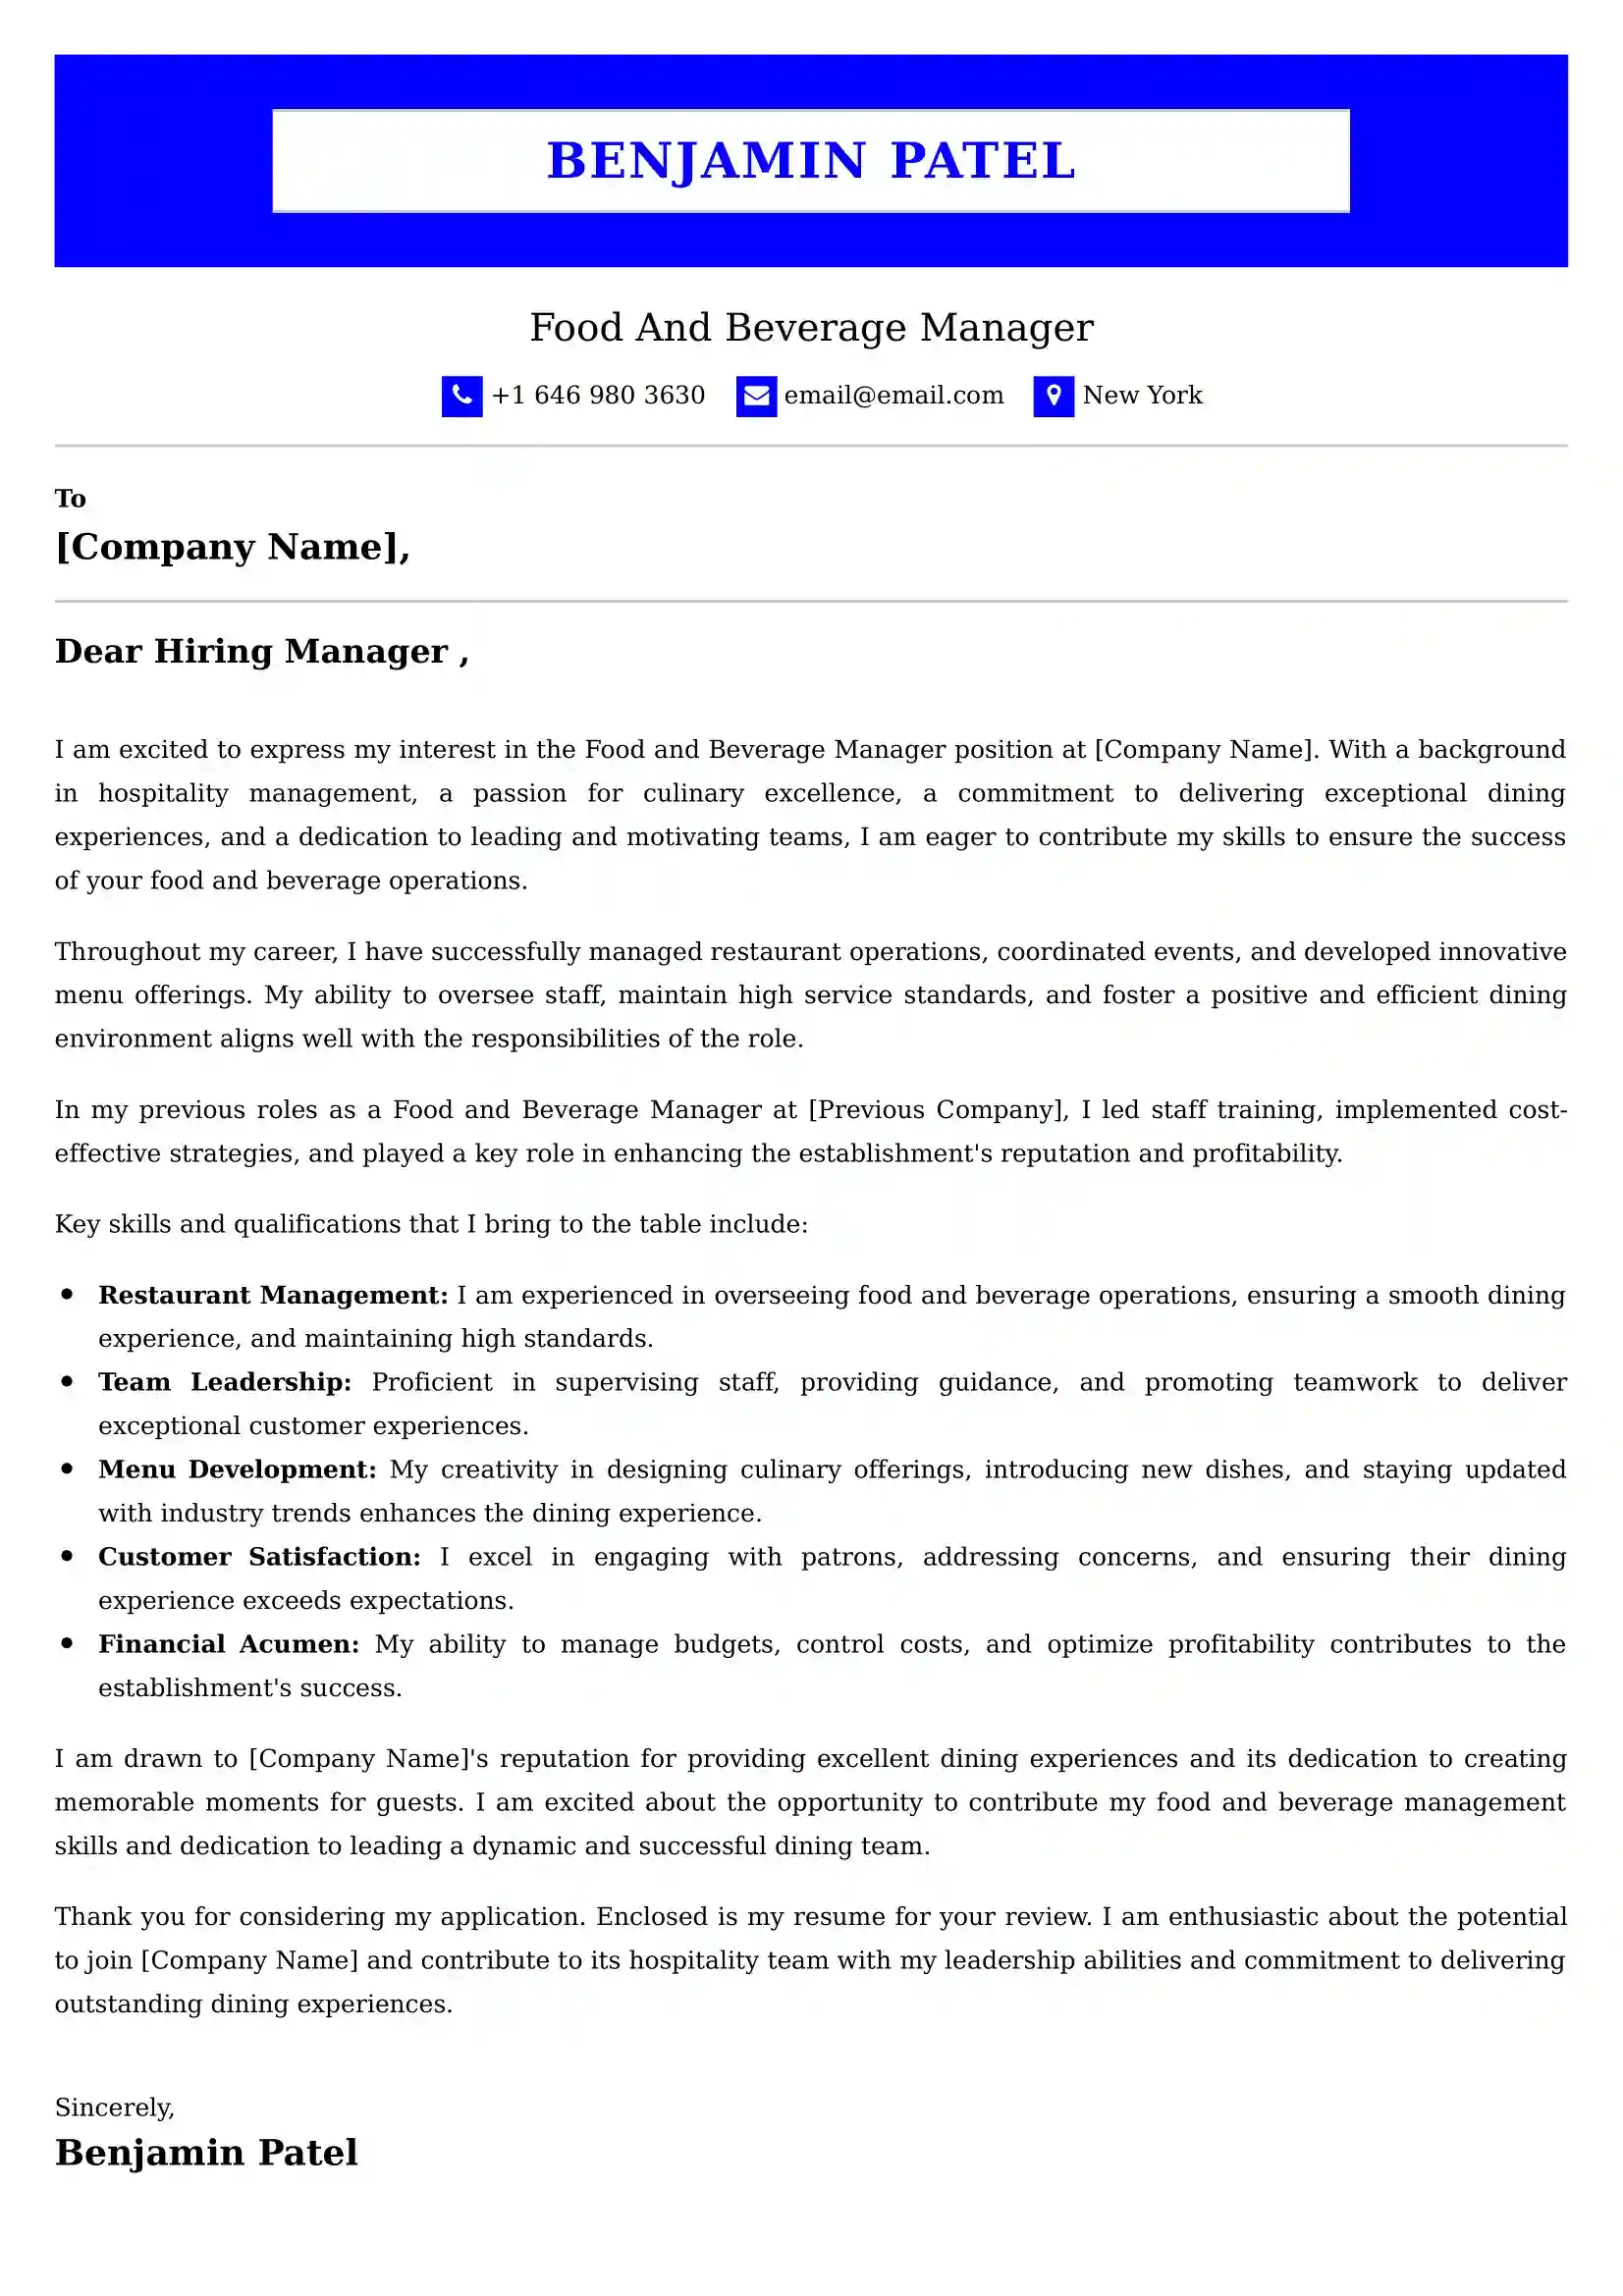 Food And Beverage Server Cover Letter Examples for UAE 